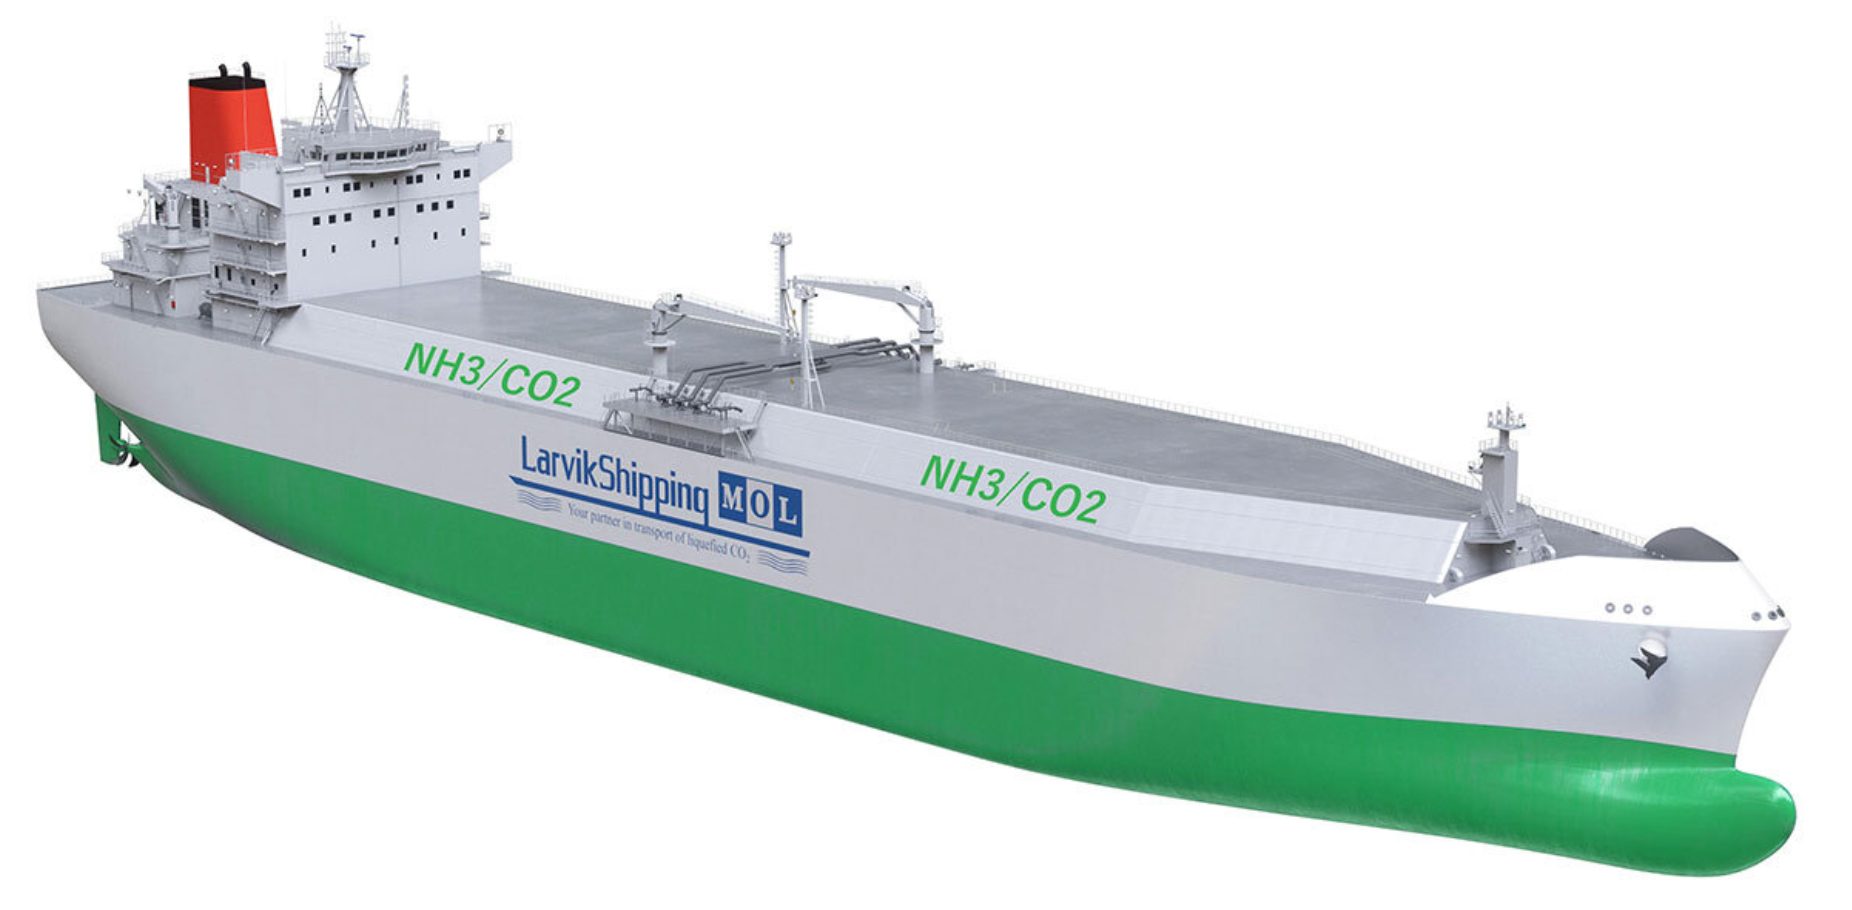 MOL finishes concept study of ammonia/liquefied CO2 carrier